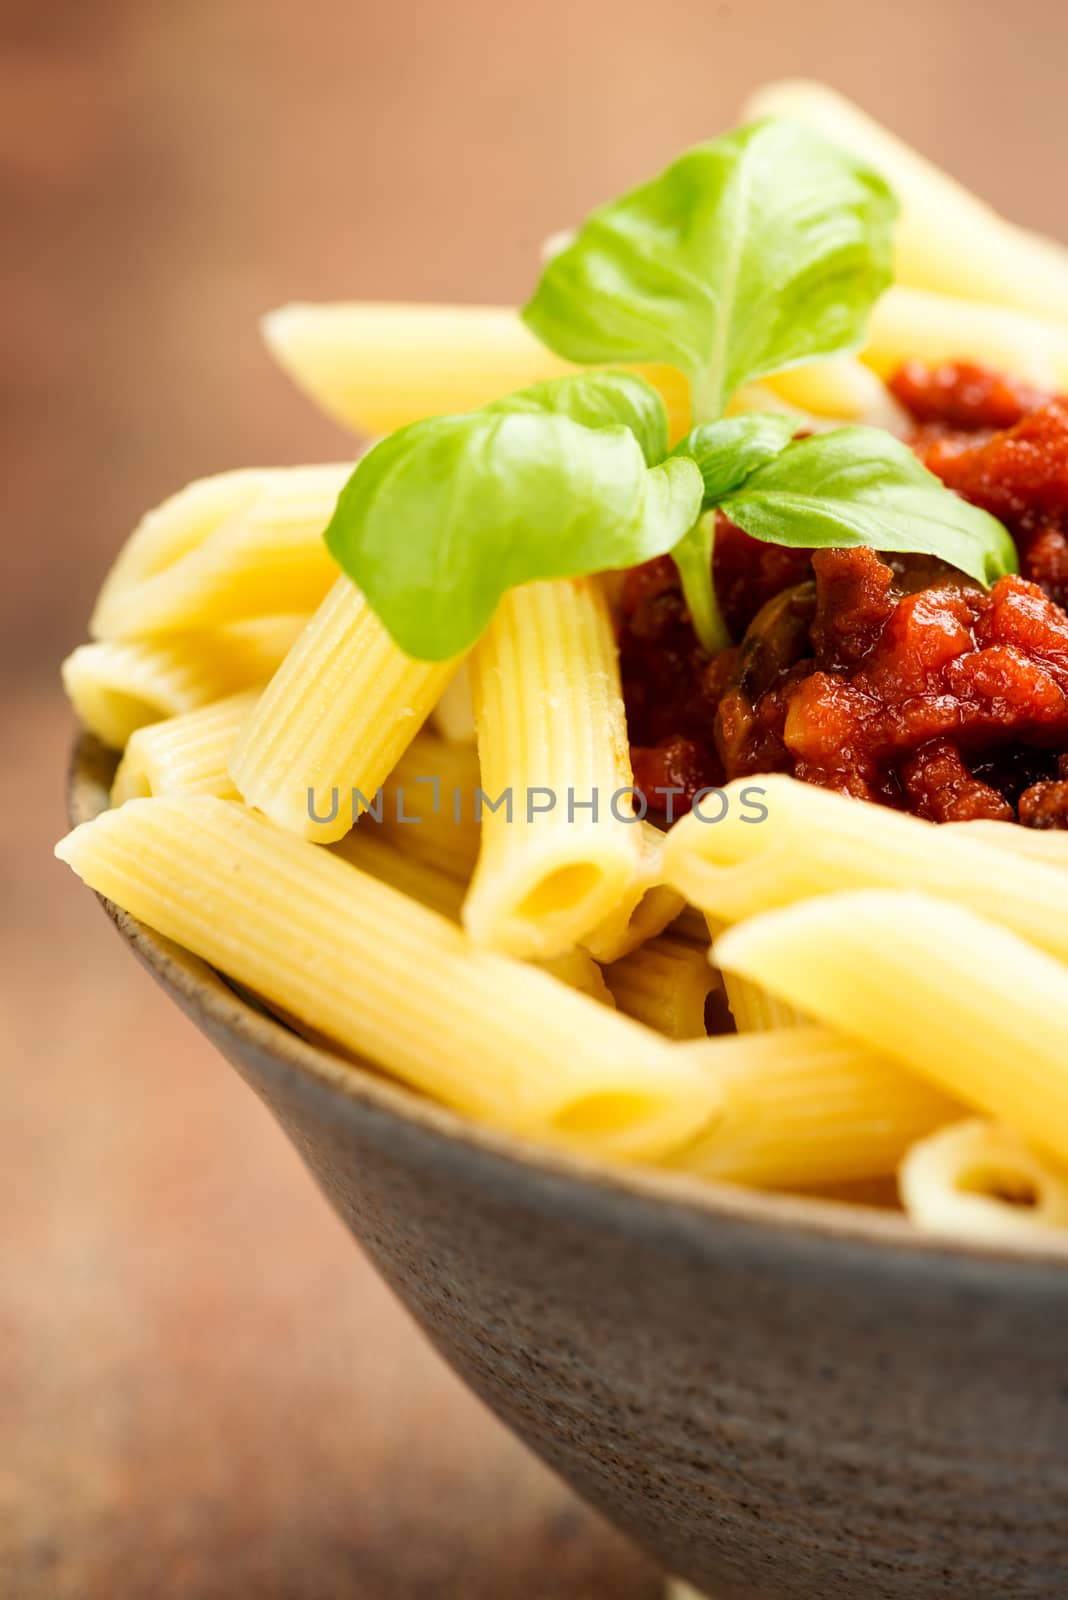 Penne pasta with a tomato bolognese beef sauce by Nanisimova